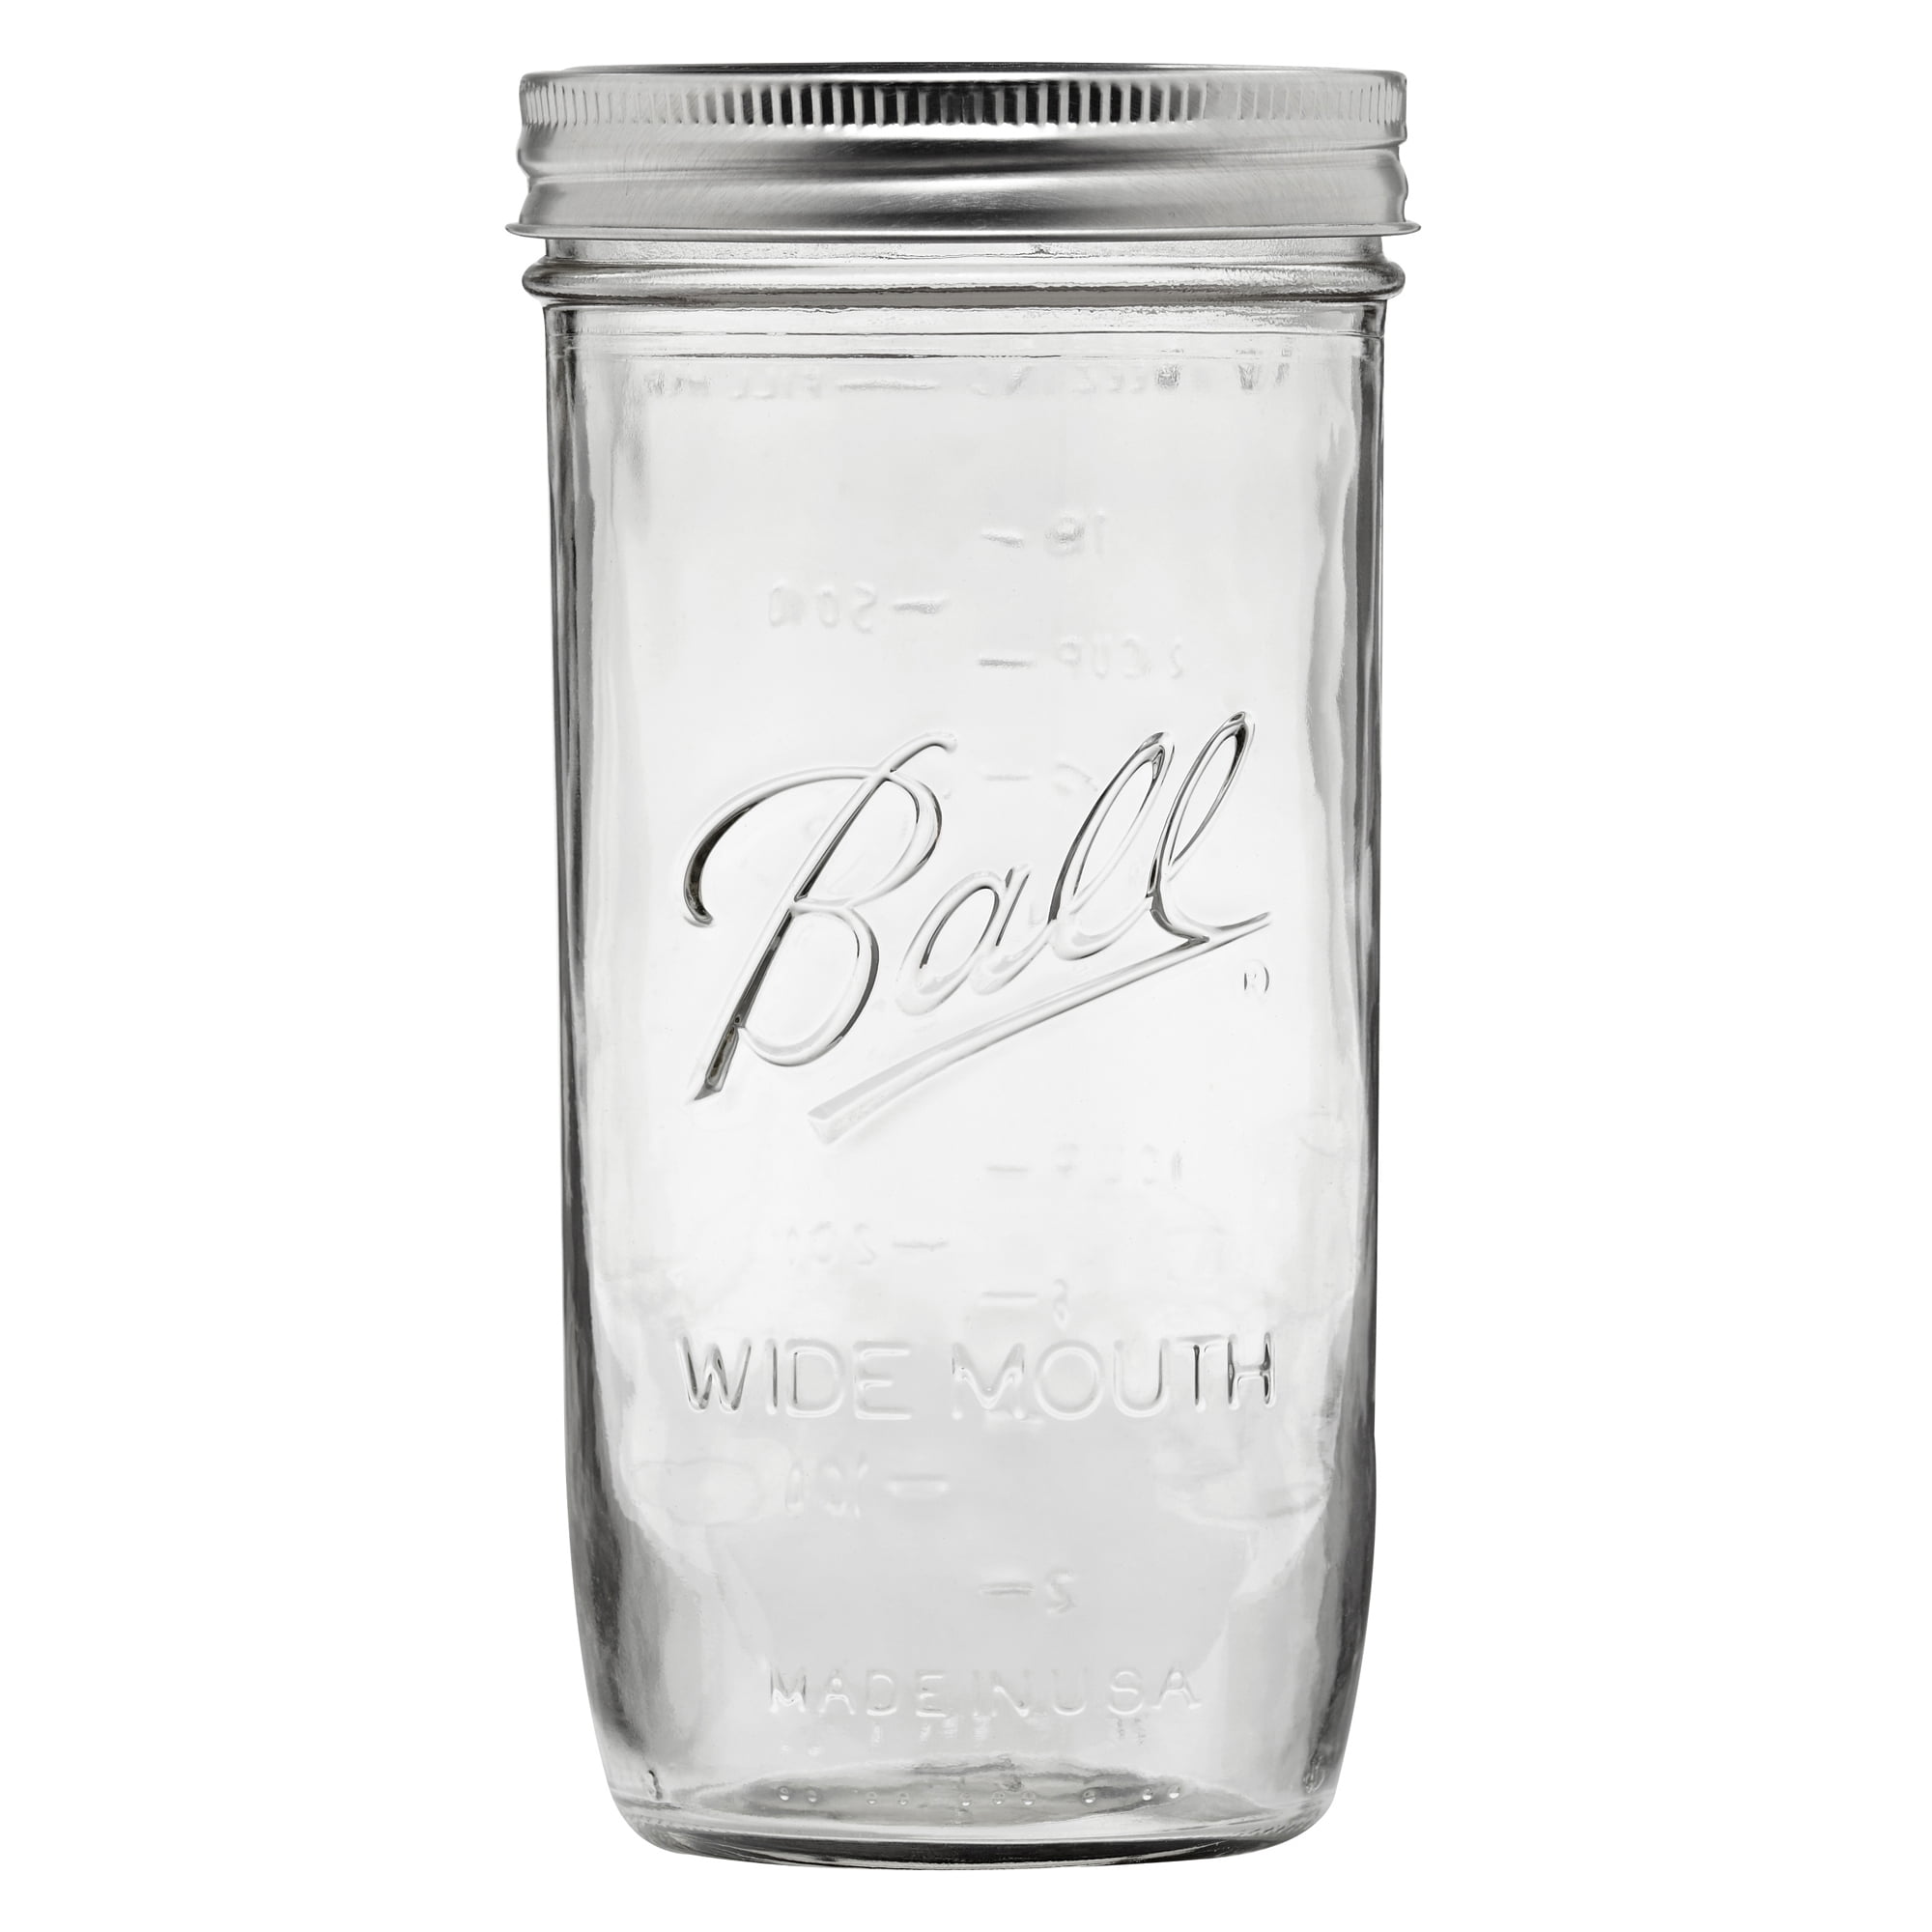 Ball Drinkware, Mason Jar Sip & Straw Lids, Wide Mouth, 2 Count